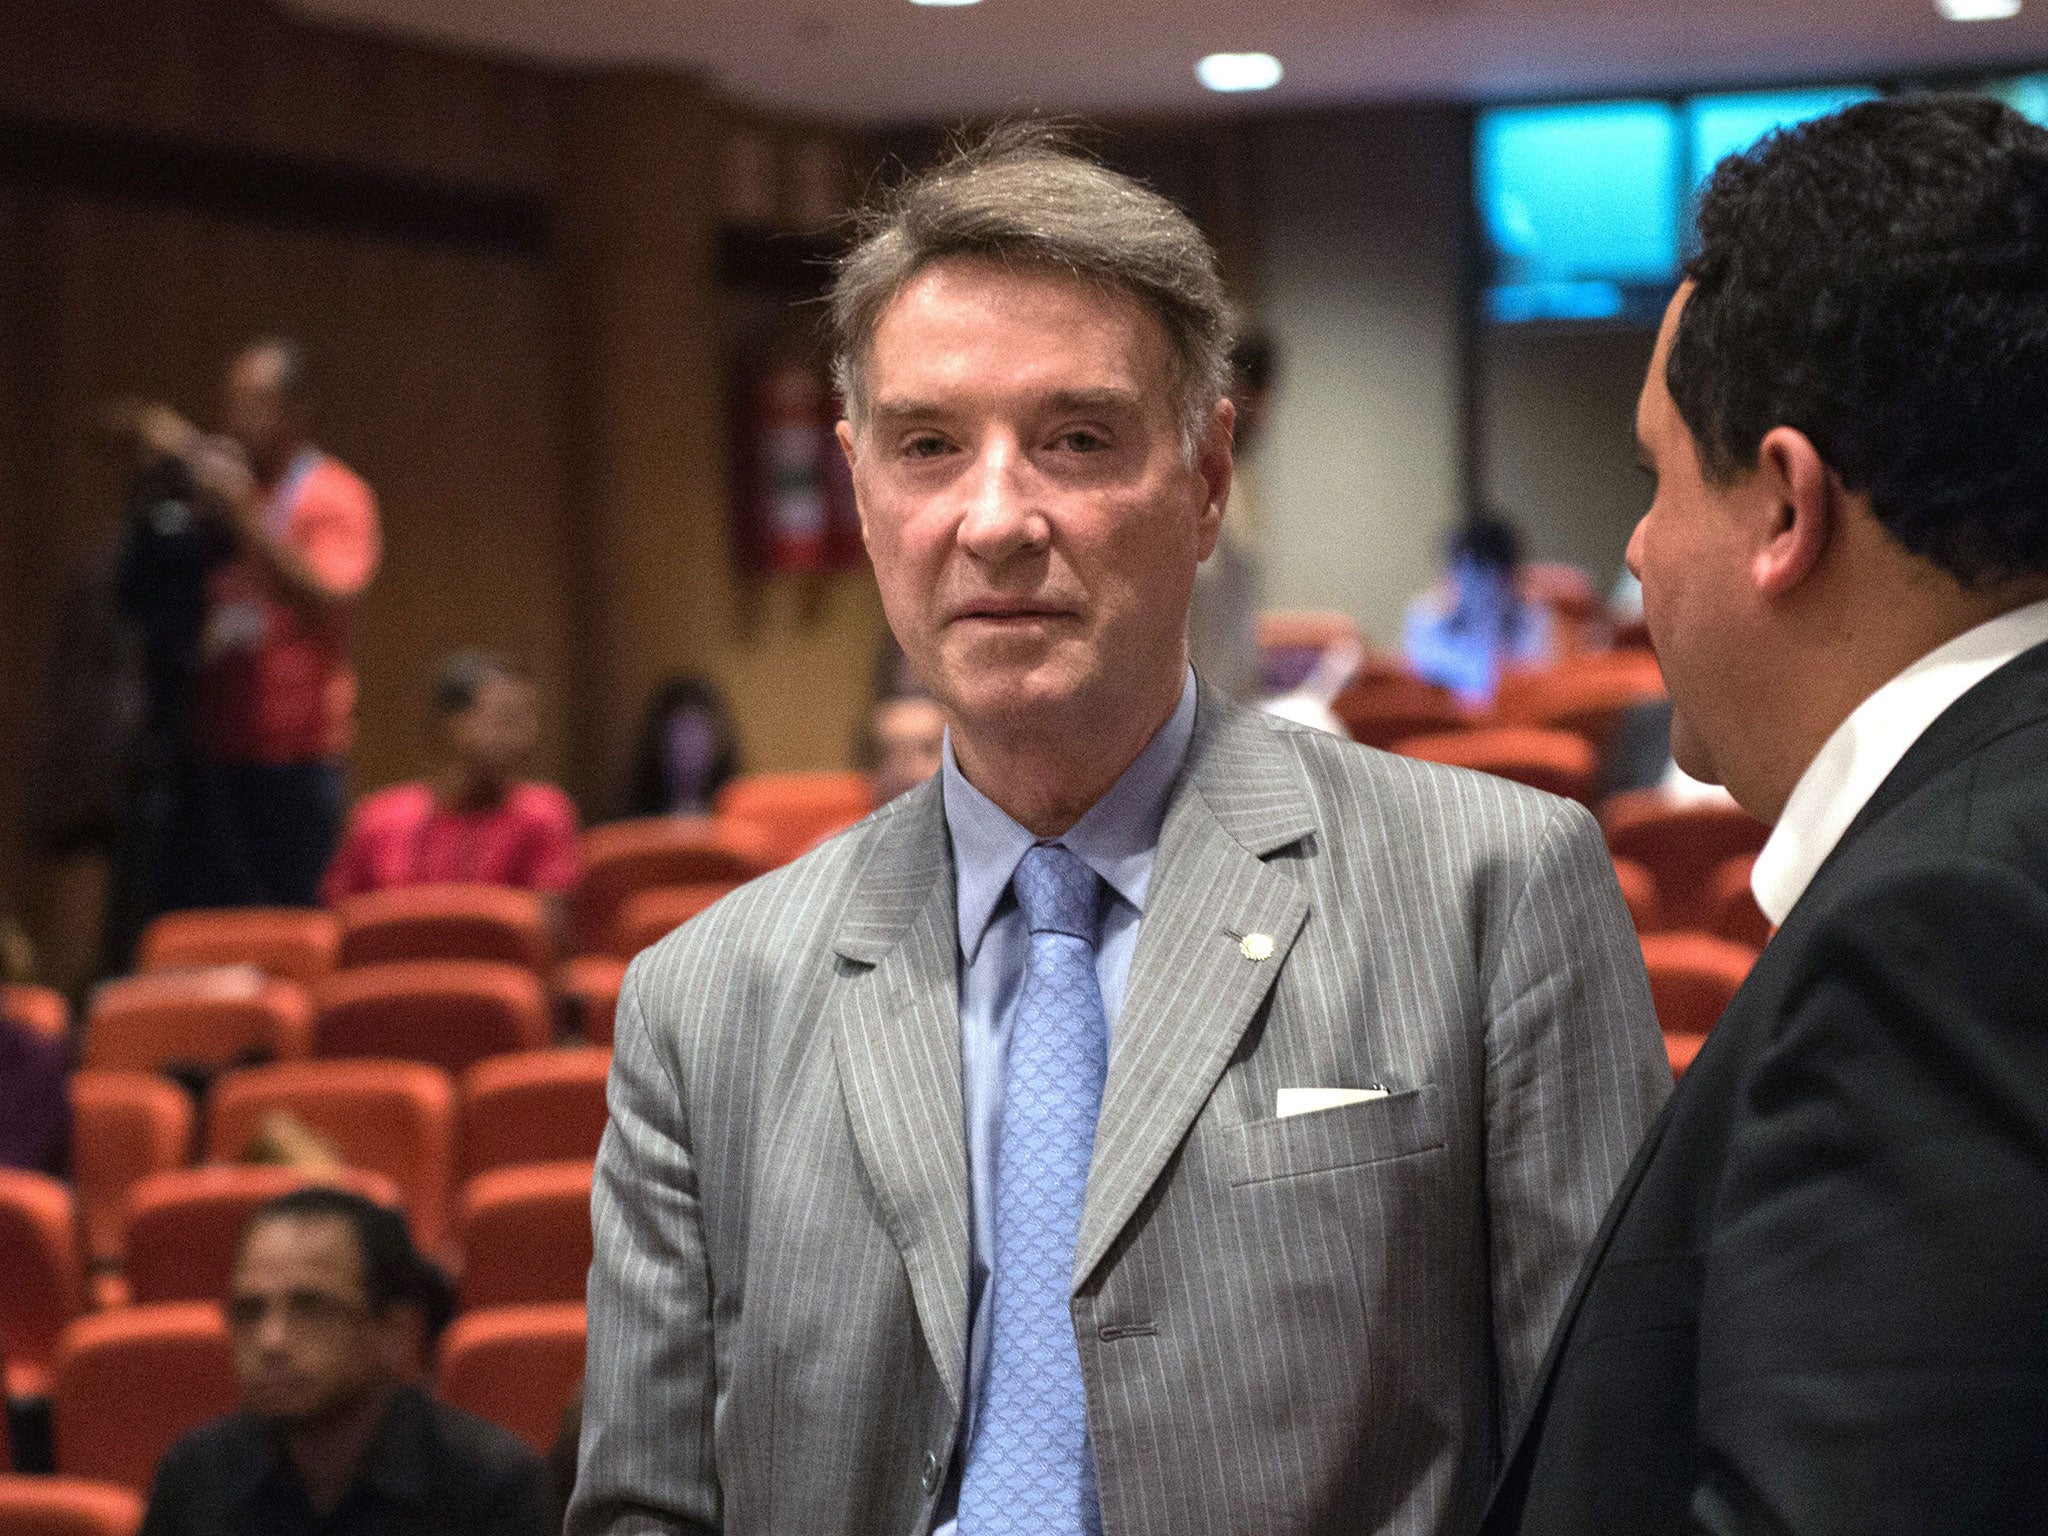 Eike Batista lost 99 per cent of his £25bn wealth in 2013 when his business empire collapsed